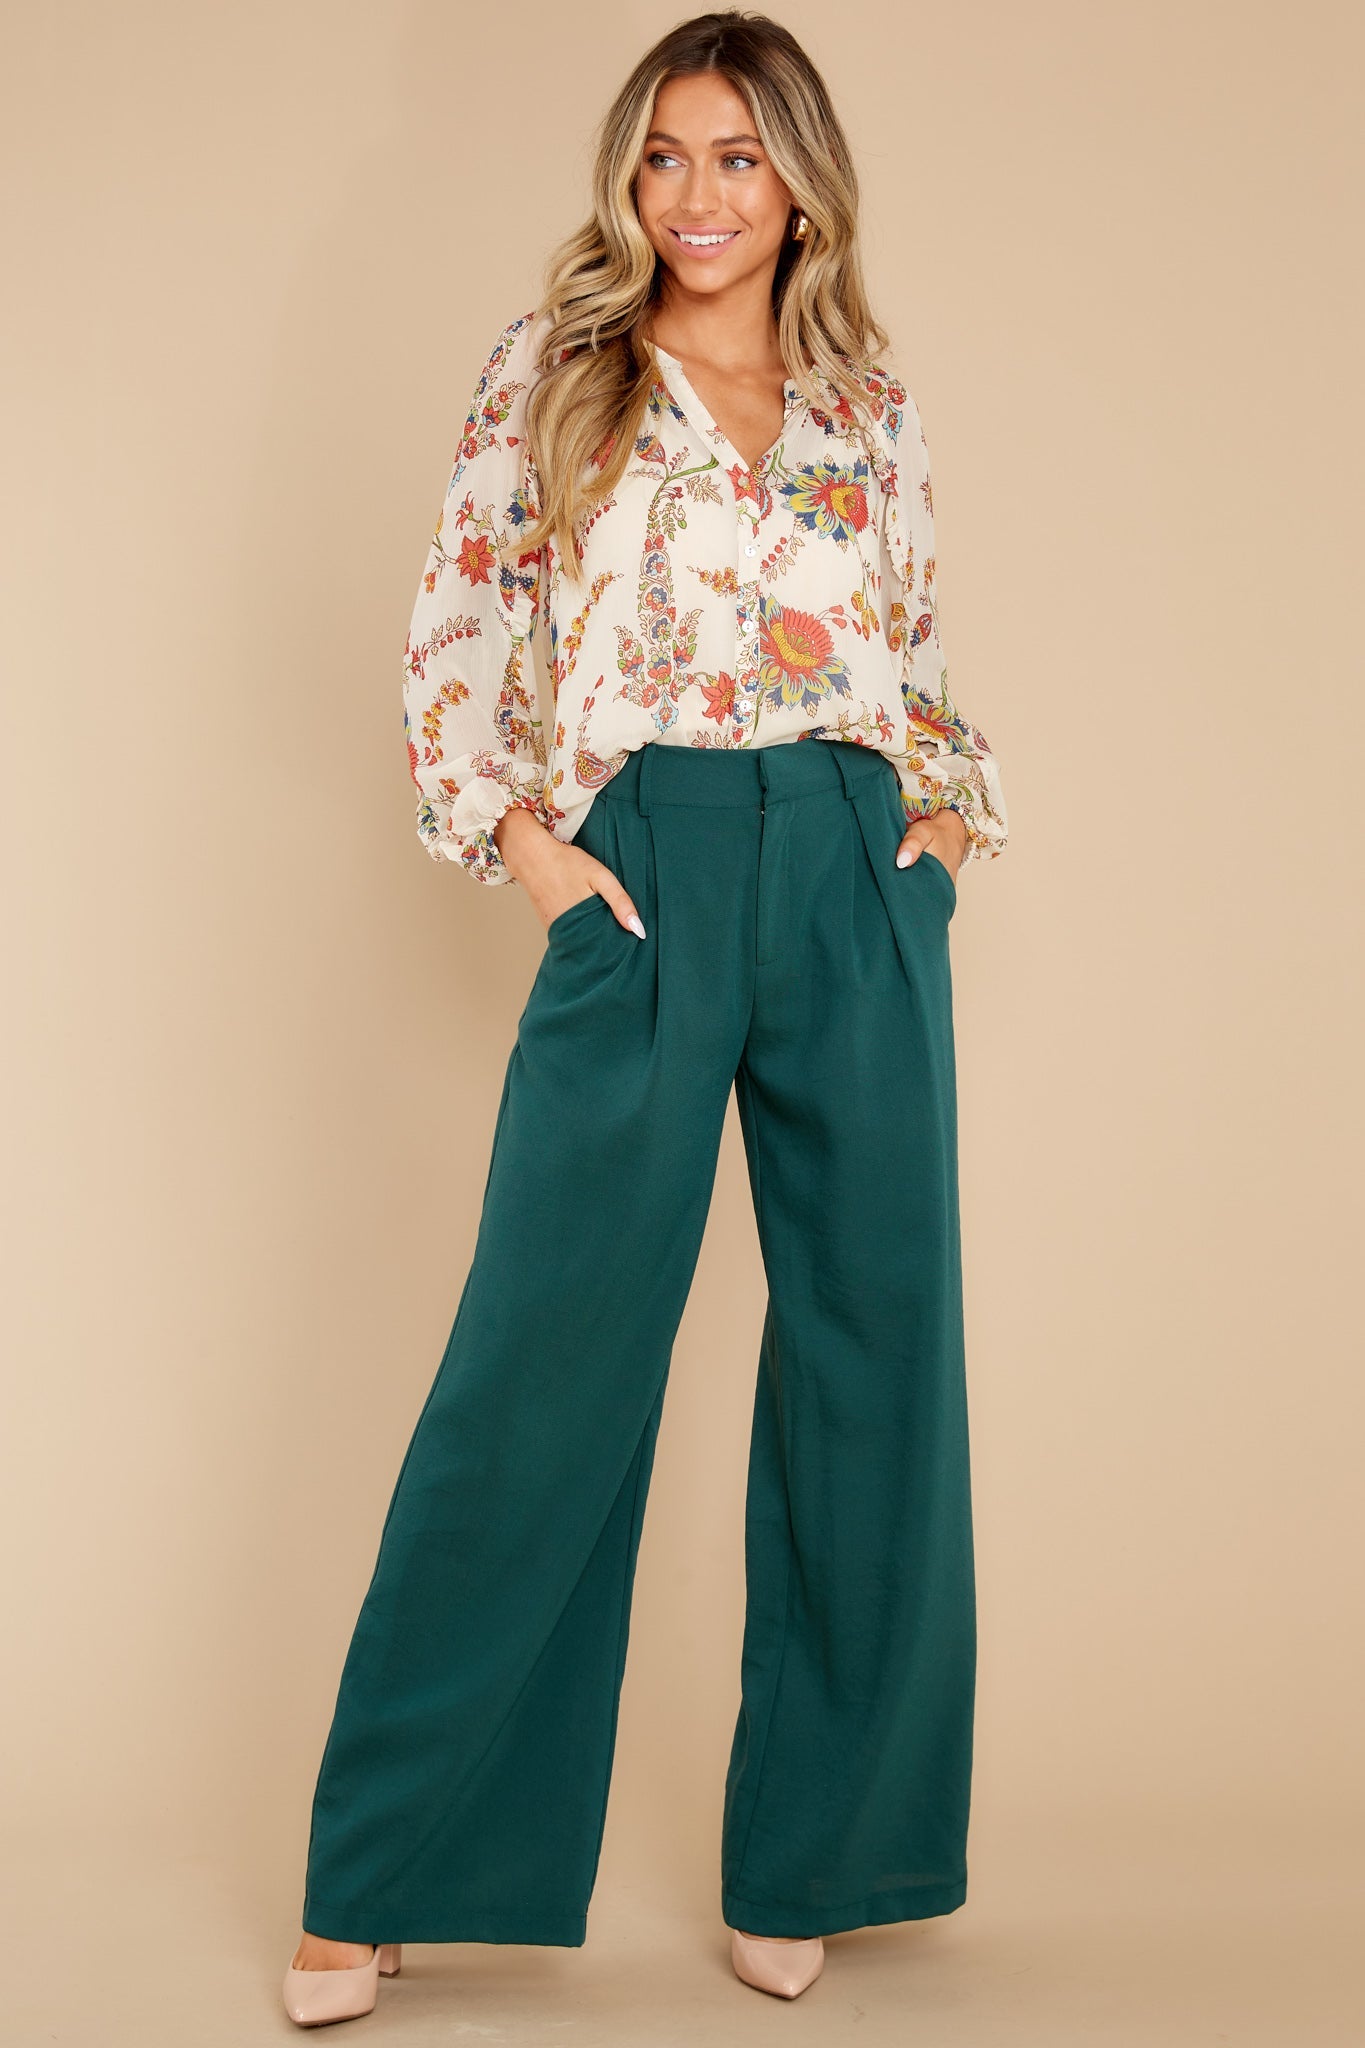 Aura Fabulous Green Pants - Office Outfits